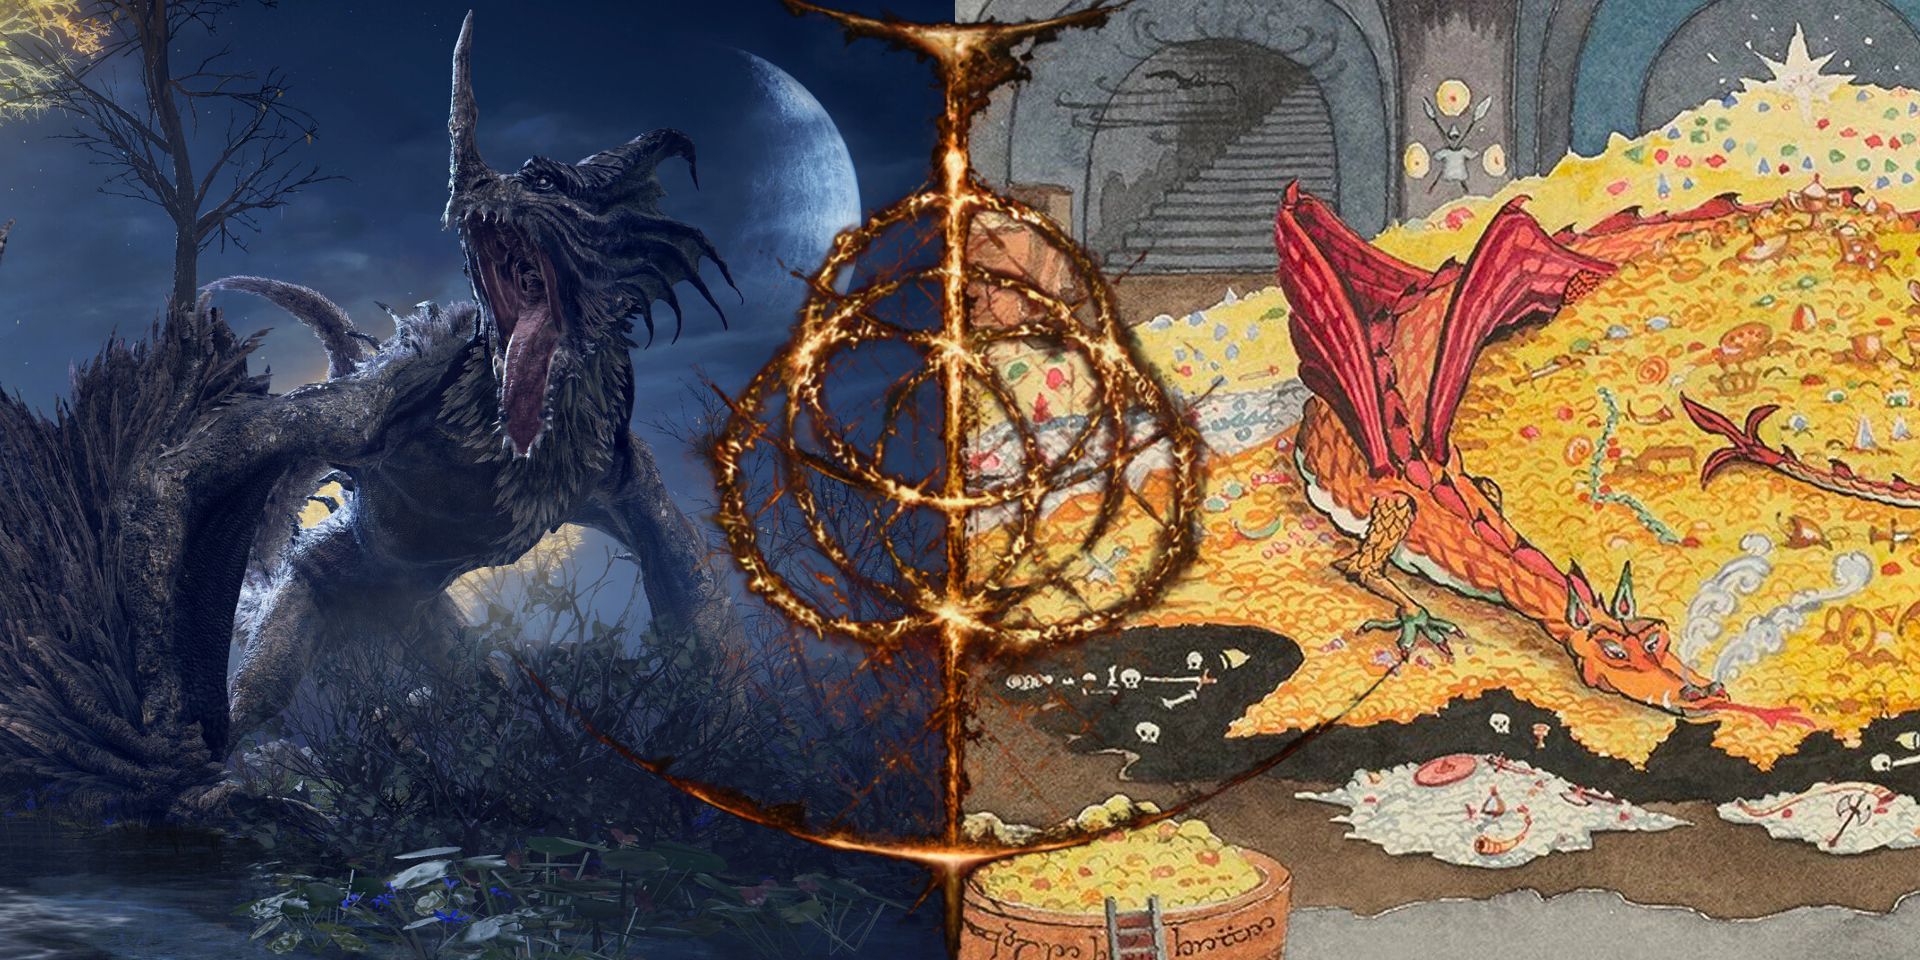 An image of a dragon from Elden Ring next to a watercolor of Smaug from The Hobbit.